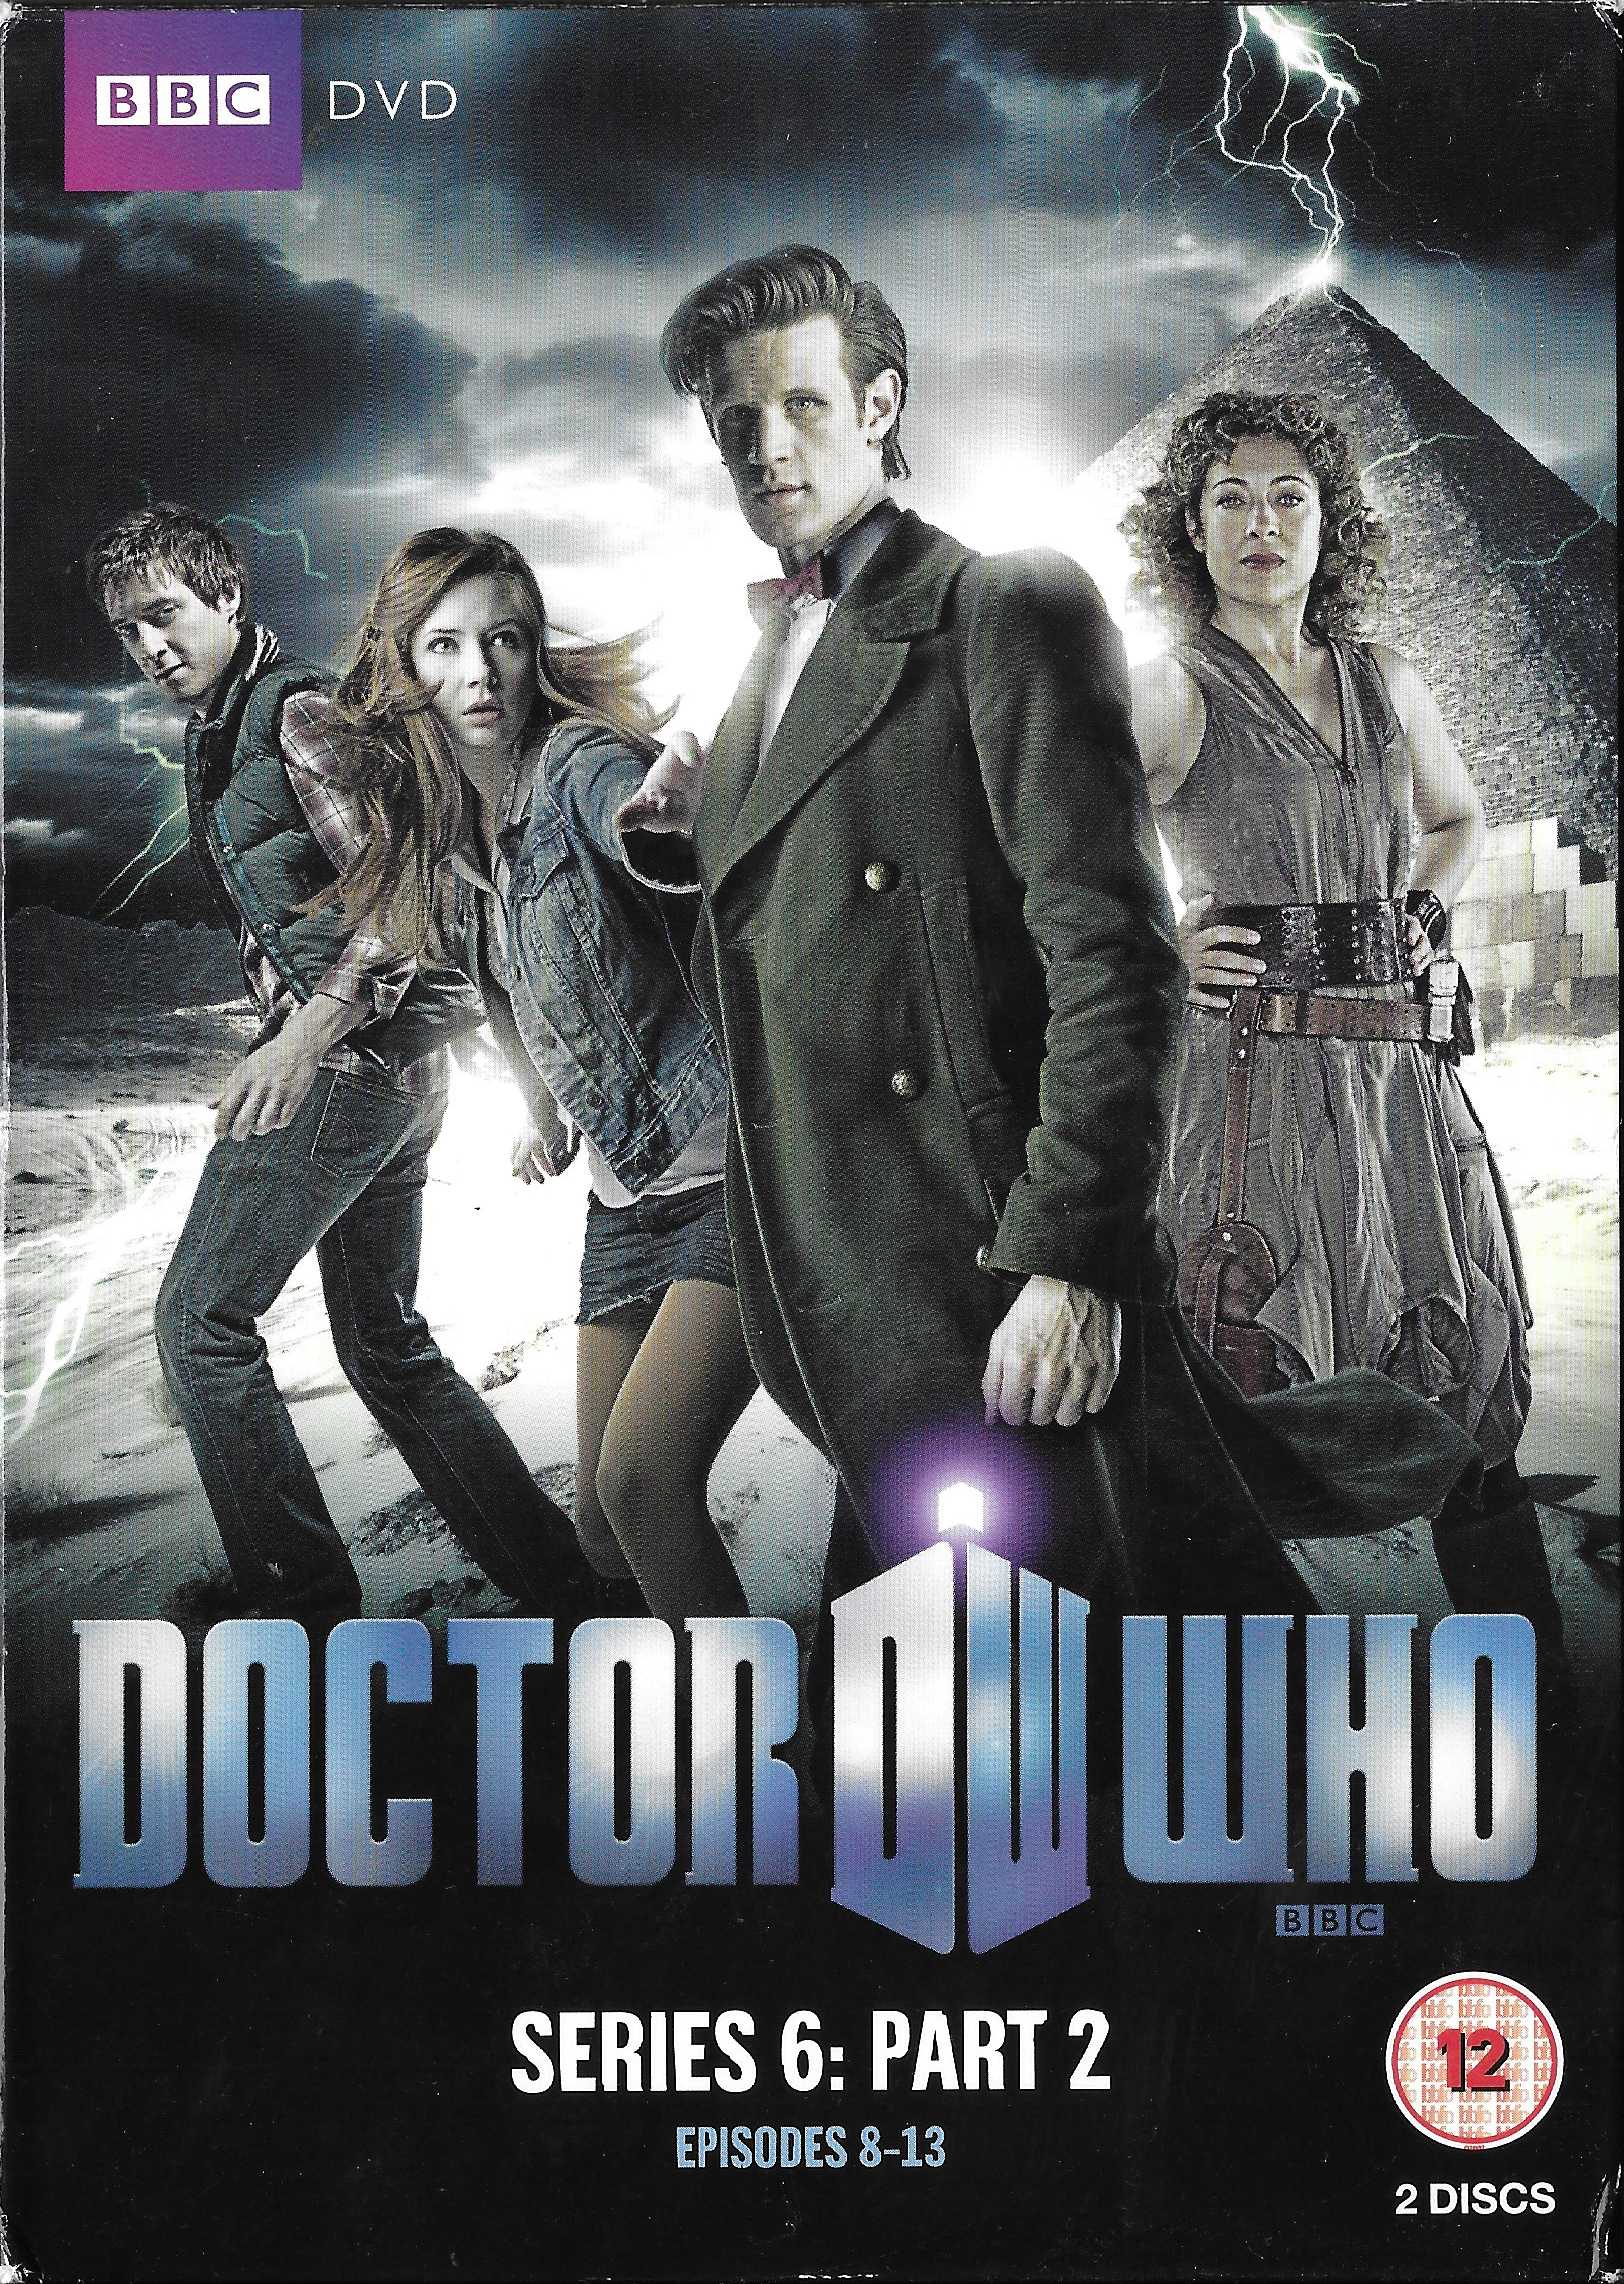 Picture of BBCDVD 3429 Doctor Who - Series 6, volume 2 by artist Steven Moffat / Mark Gatiss / Tom Macrae from the BBC records and Tapes library